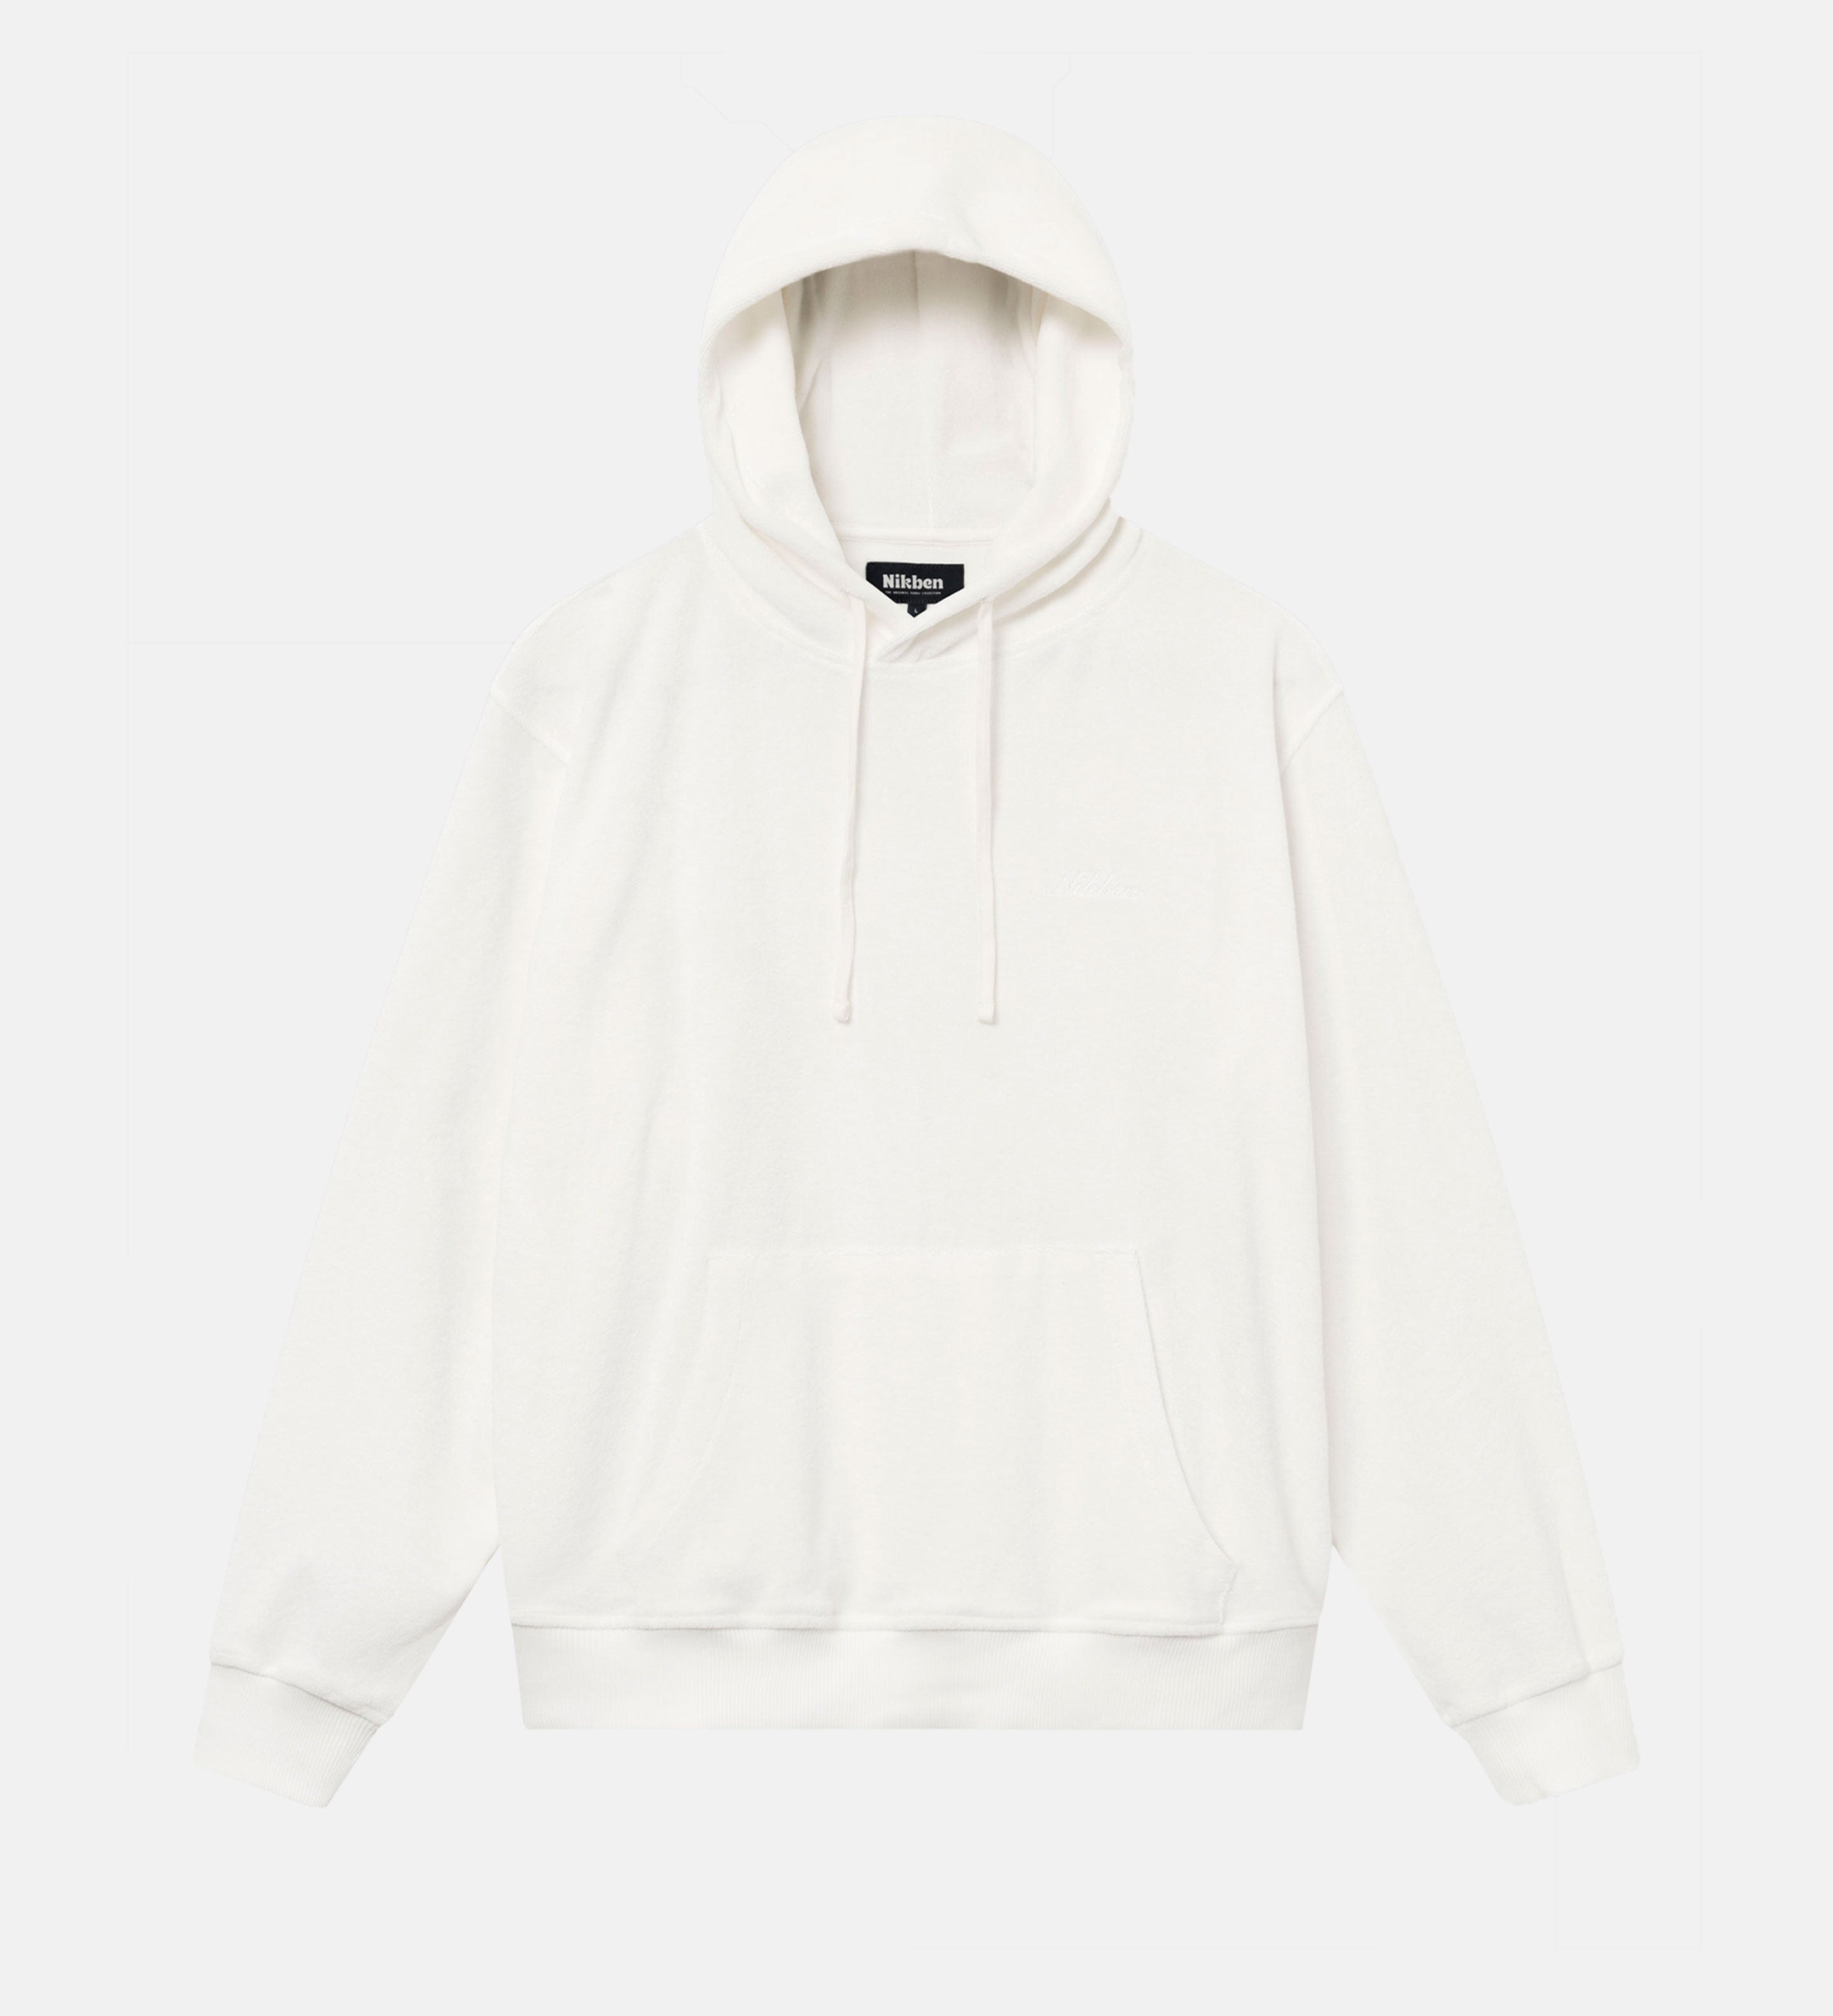 Off White hoodie made from terry toweling cloth. It features drawstrings, a single front pocket, and a white embroidered "Nikben" logo on the chest